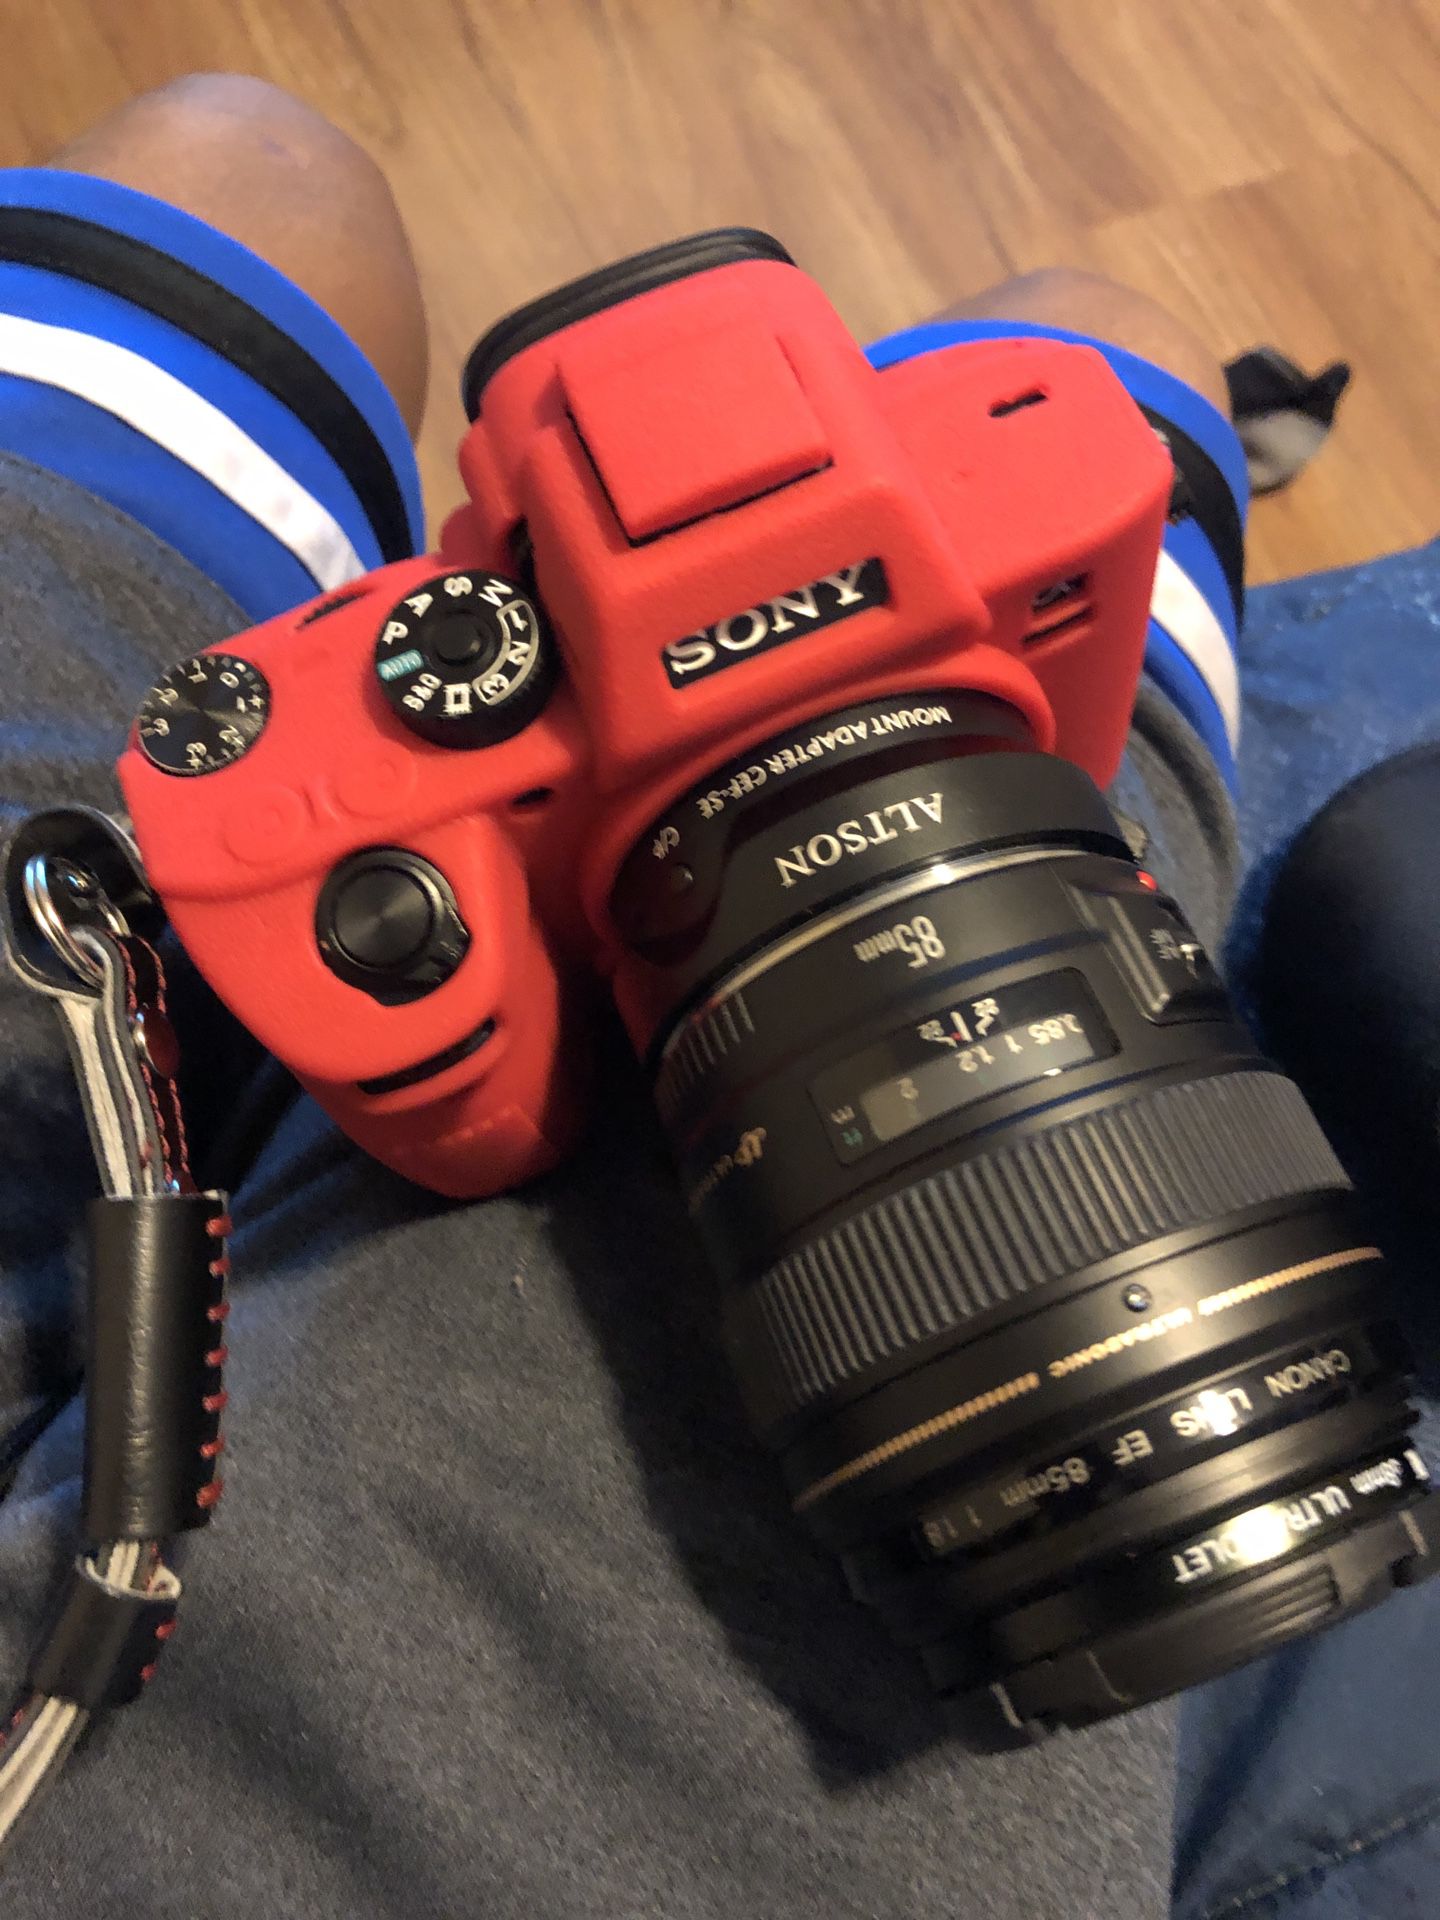 Sony a7riii with many extras for a high end gaming laptop and cash